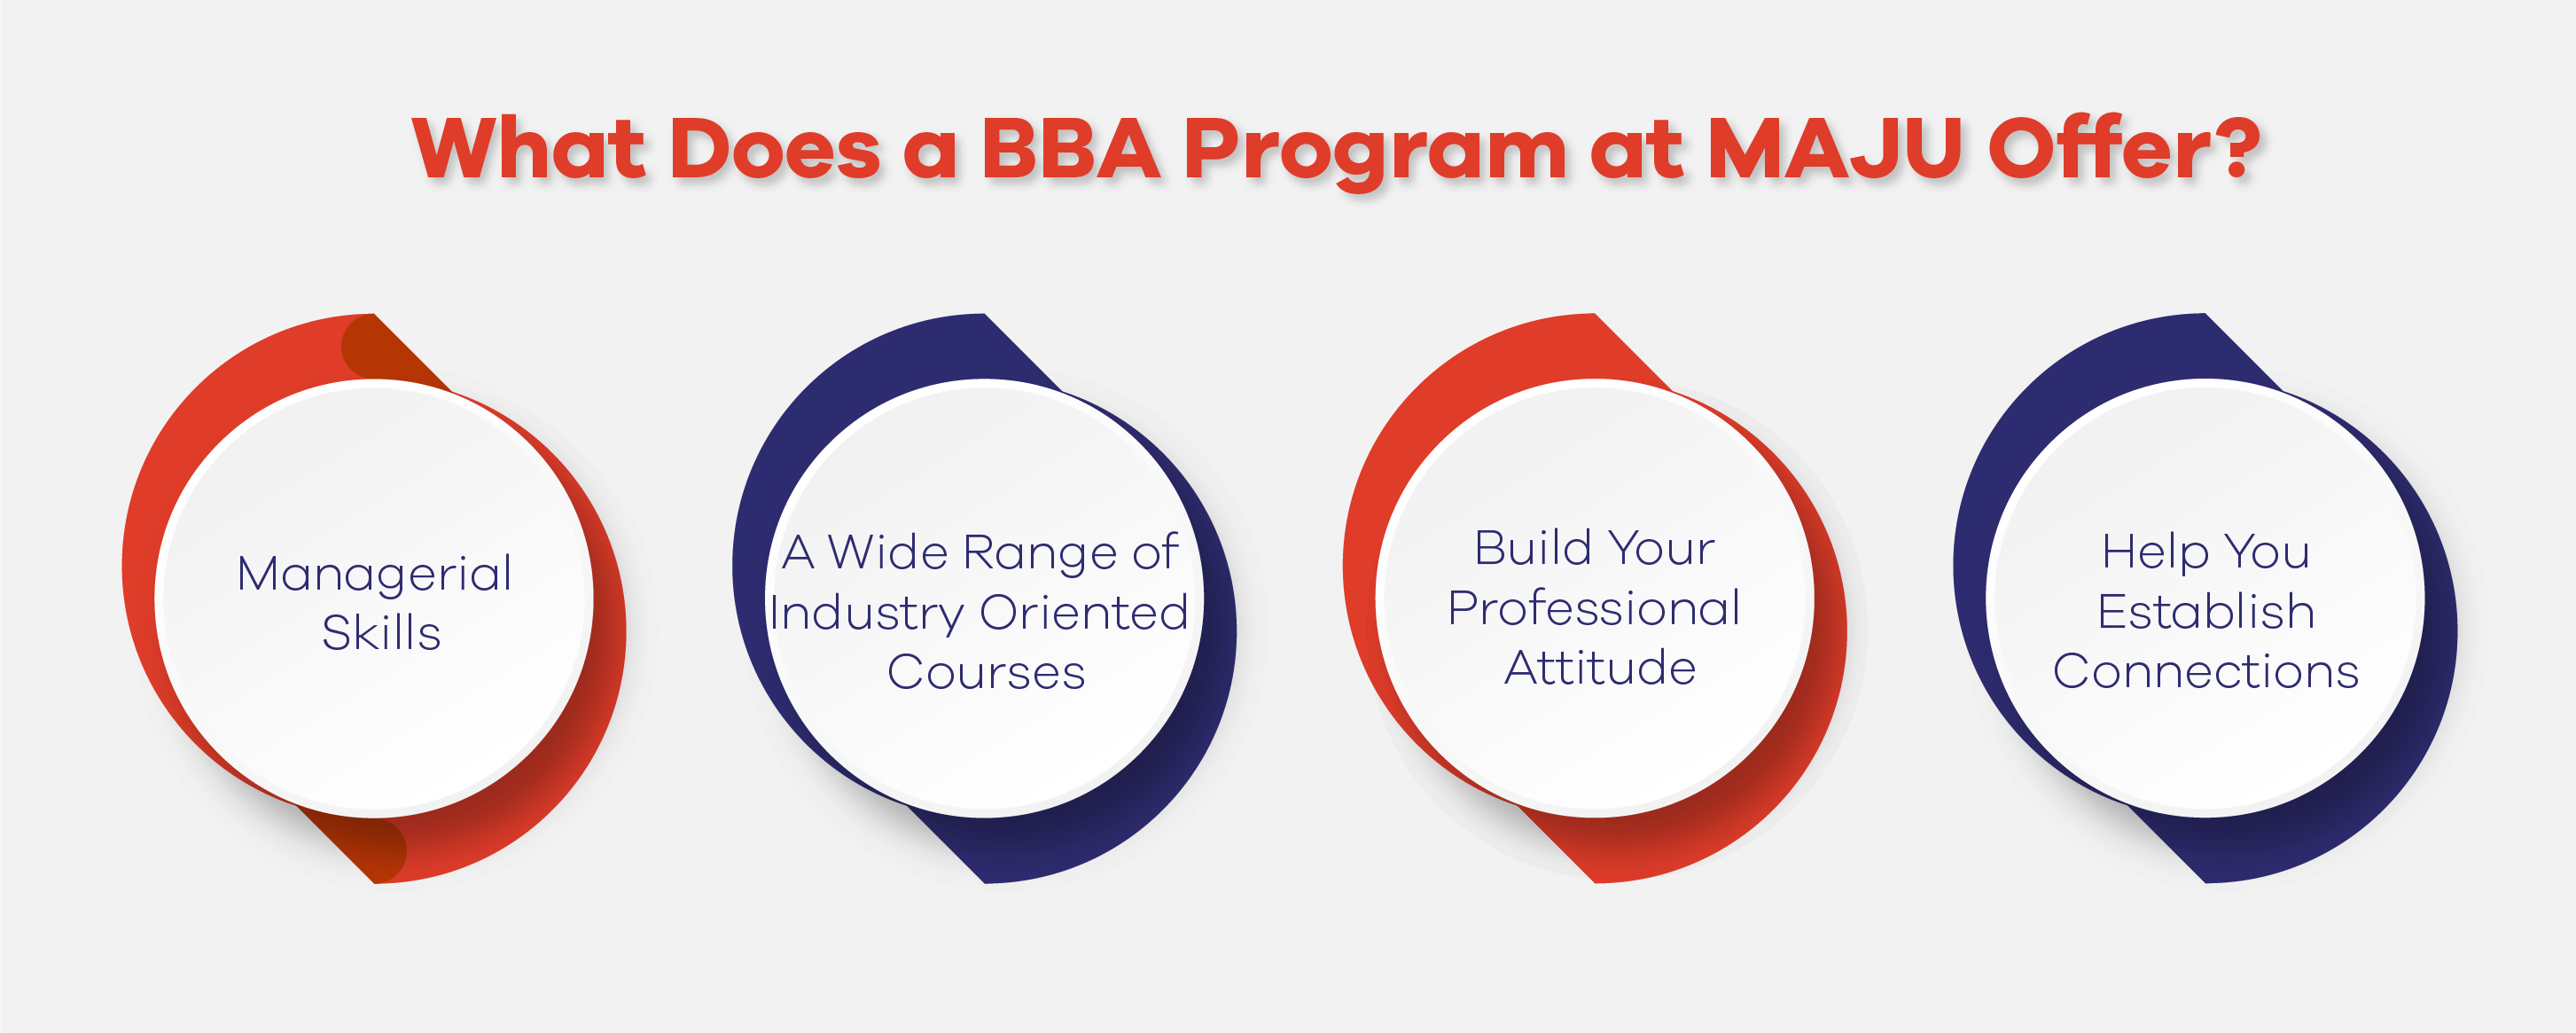 What Does a BBA Program at MAJU Offer? 